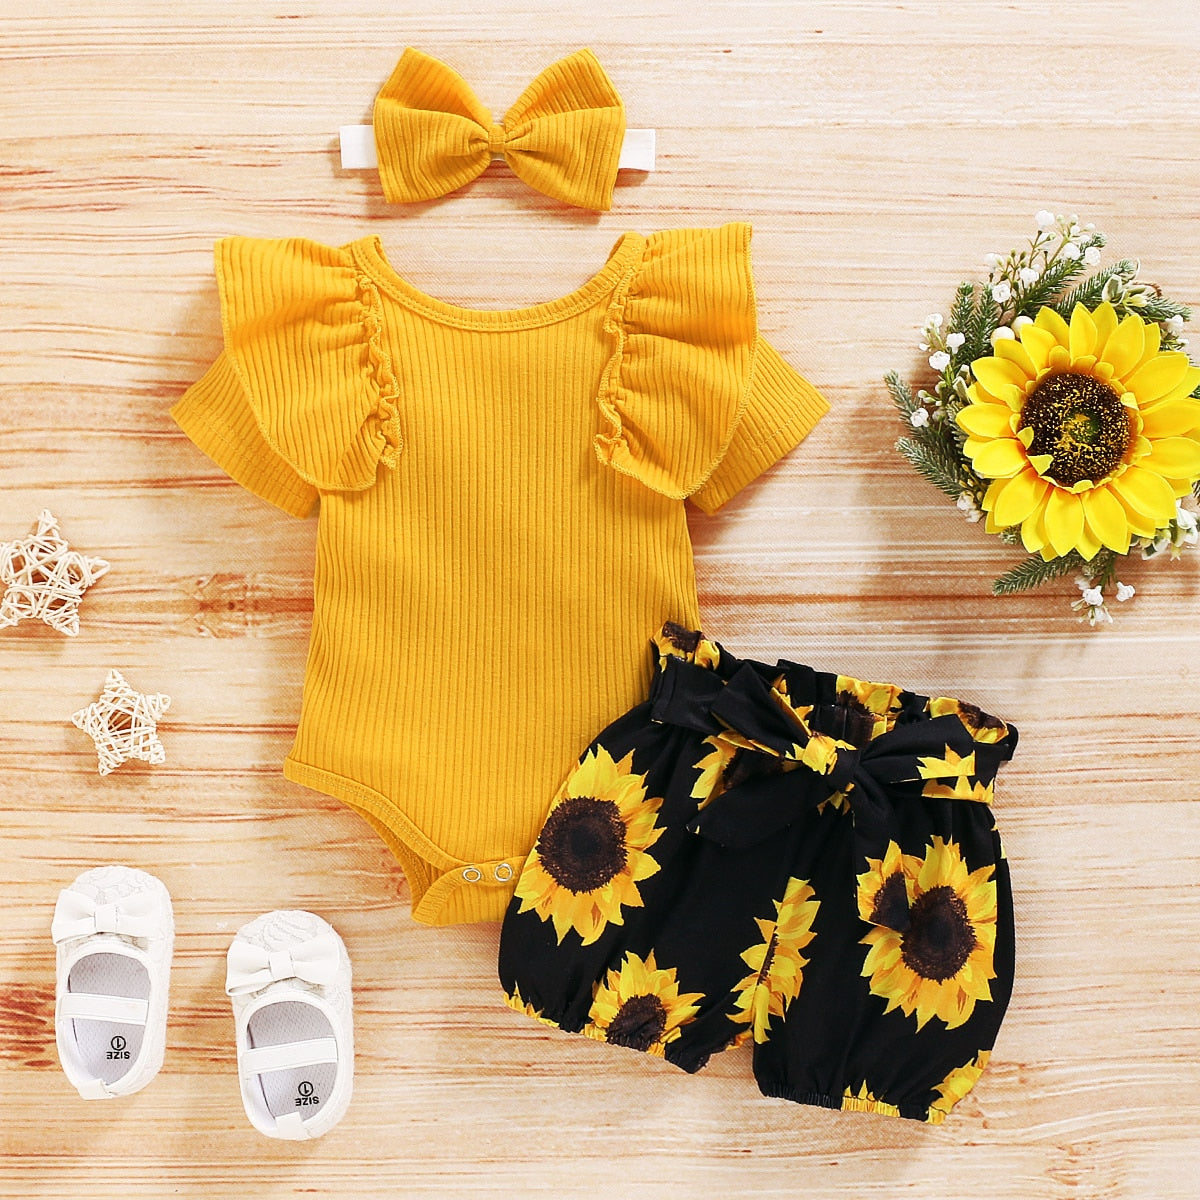 Newborn Infant Baby Clothing Set Short Sleeve Romper Top Sunflower Printed Shorts 3Pcs Outfit